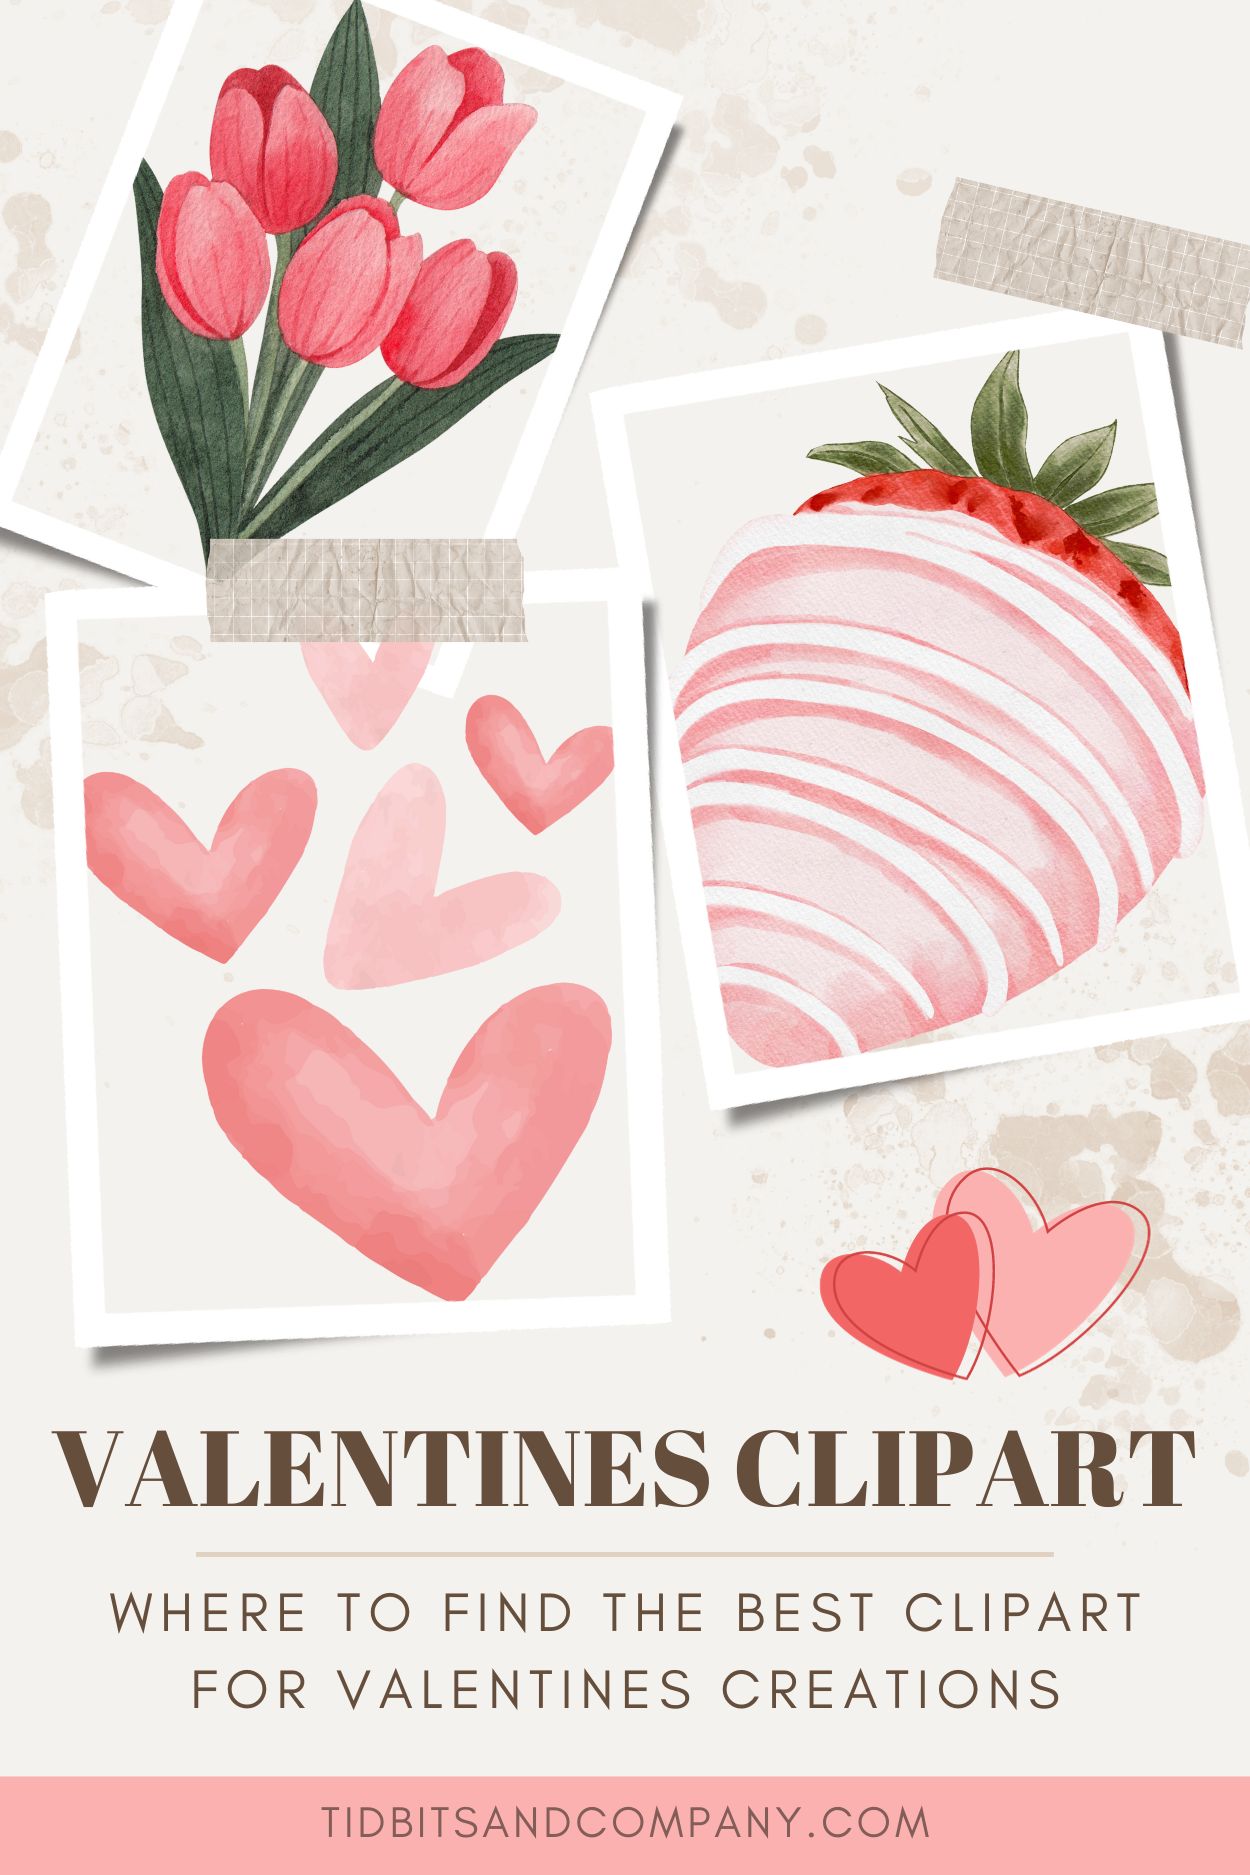 A collage of valentine's clipart